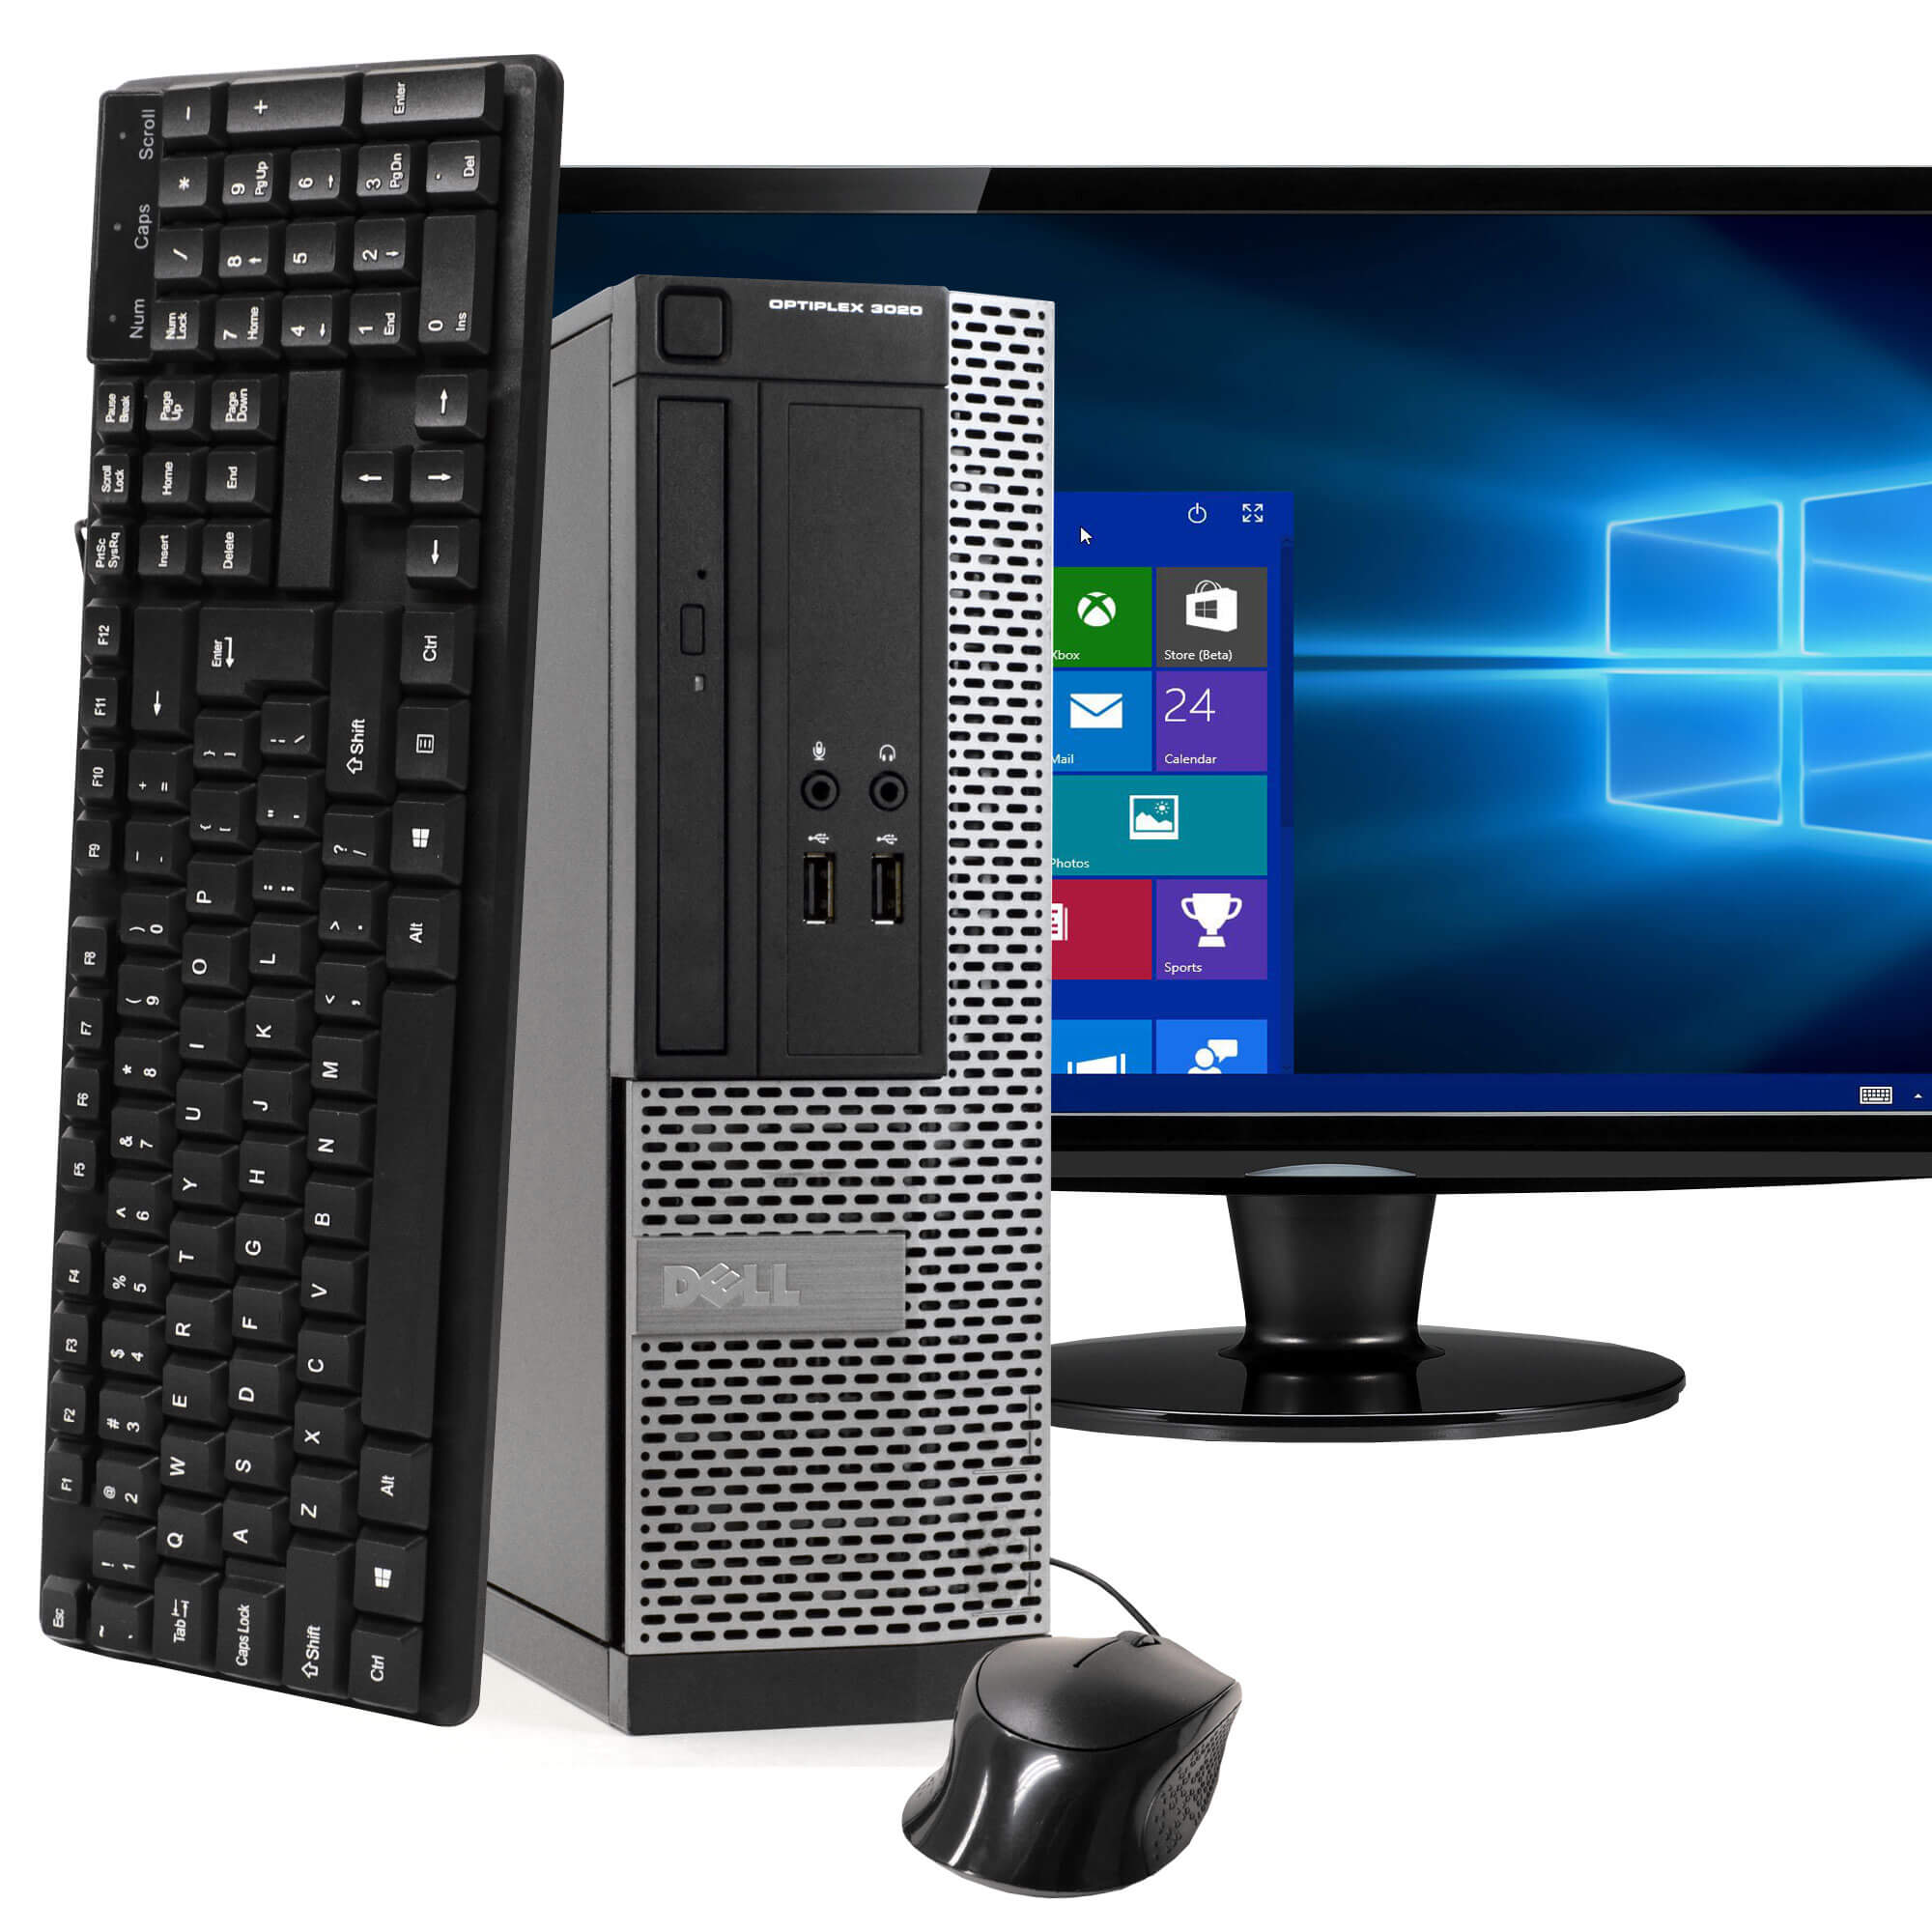 Restored Dell OptiPlex 3020 Desktop Computer PC, Intel Quad-Core i5, 1TB HDD, 8GB DDR3 RAM, Windows 10 Home, DVD, WIFI, 19in Monitor, USB Keyboard and Mouse (Refurbished) - image 1 of 8